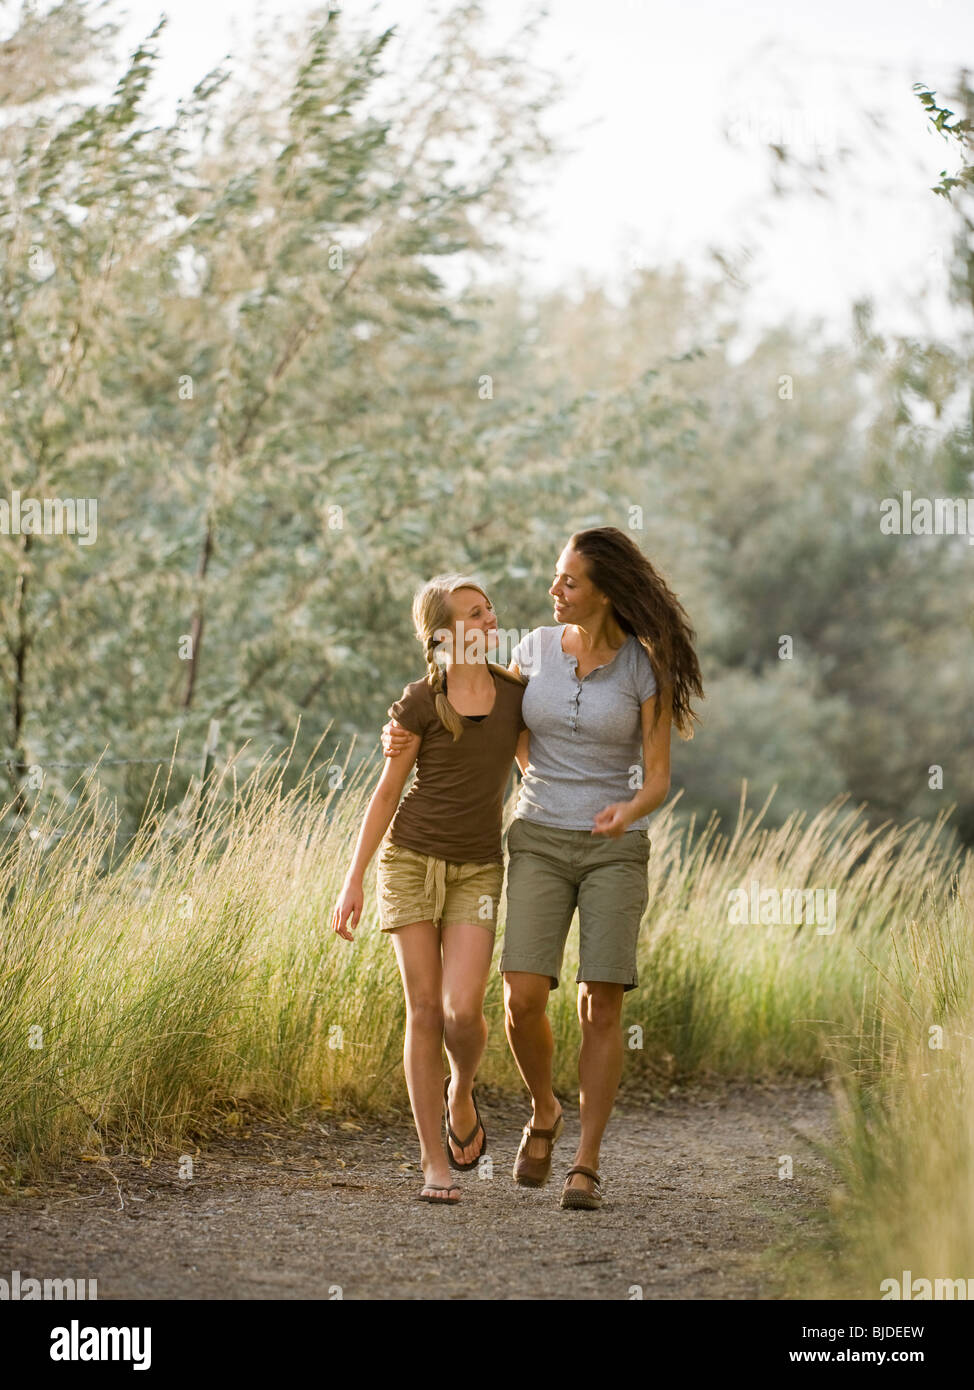 Two women on a nature walk. Stock Photo